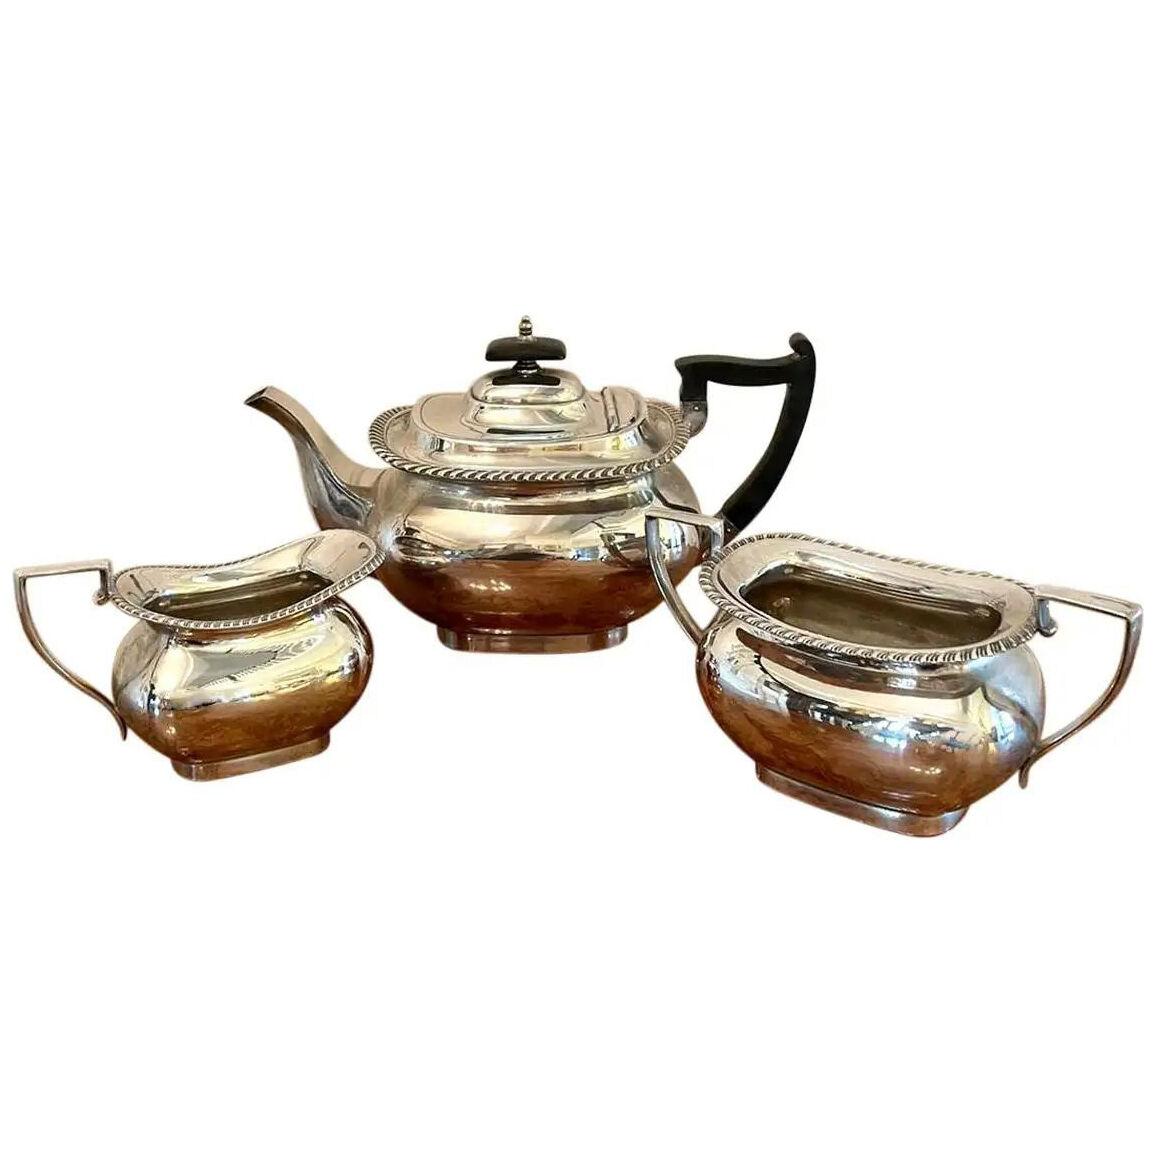 Antique Edwardian Three Piece Silver Plated Tea Set by Walker & Hall